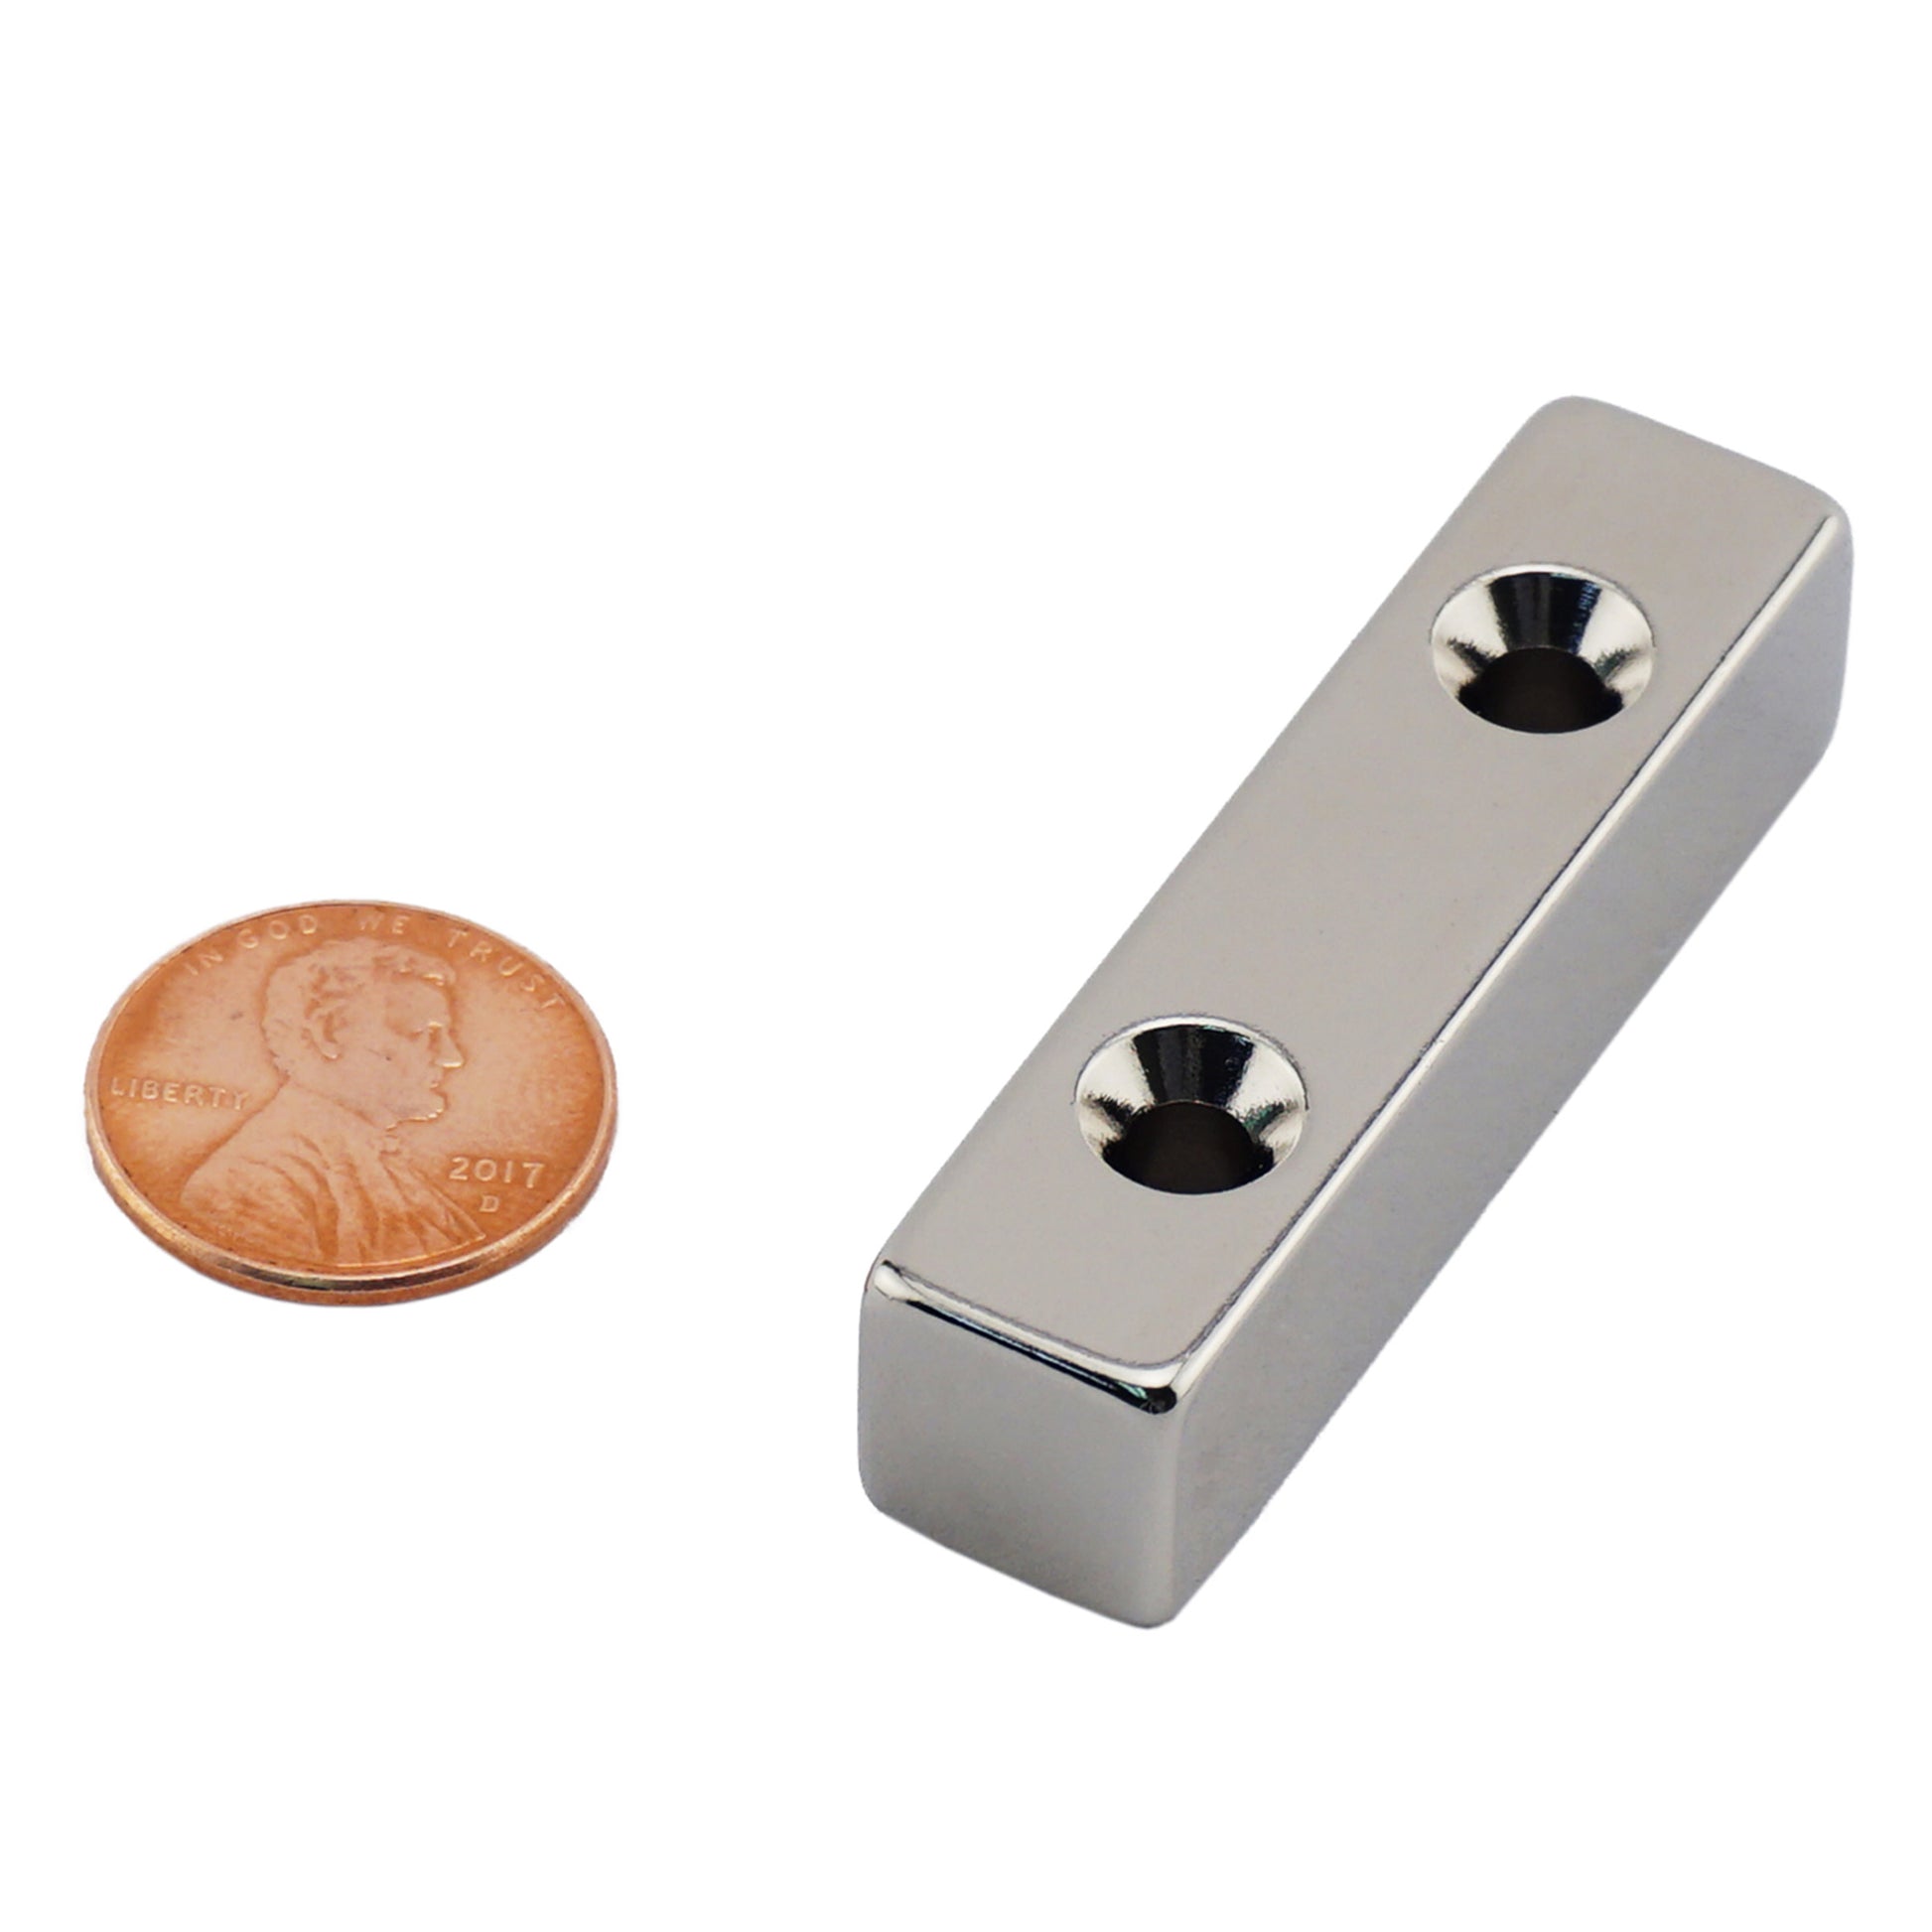 Load image into Gallery viewer, NB005055NCTSX2 Neodymium Countersunk Block Magnet - Compared to Penny for Size Reference